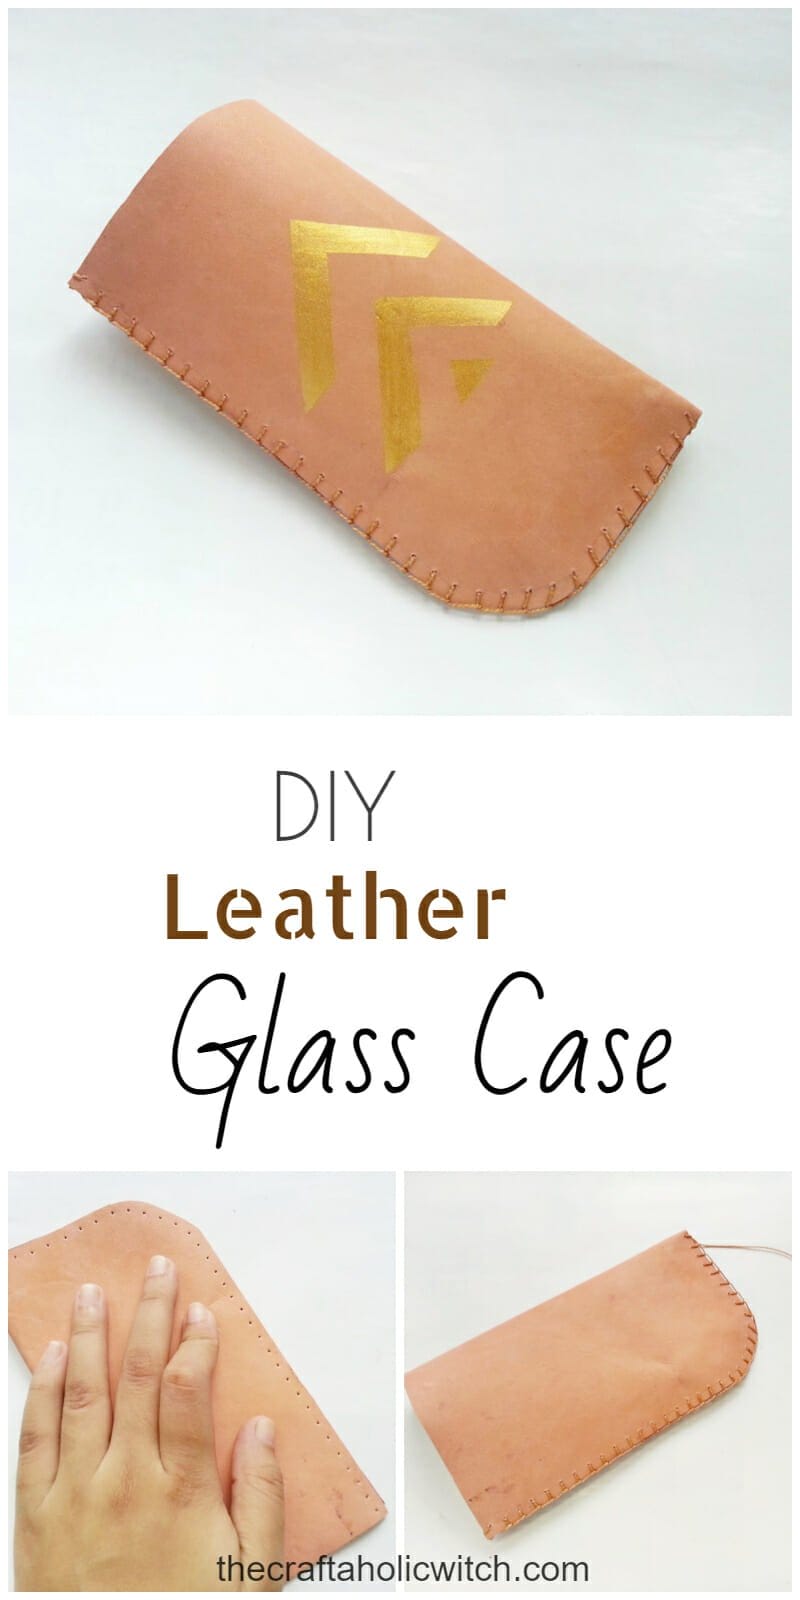 DIY Leather Glass Case